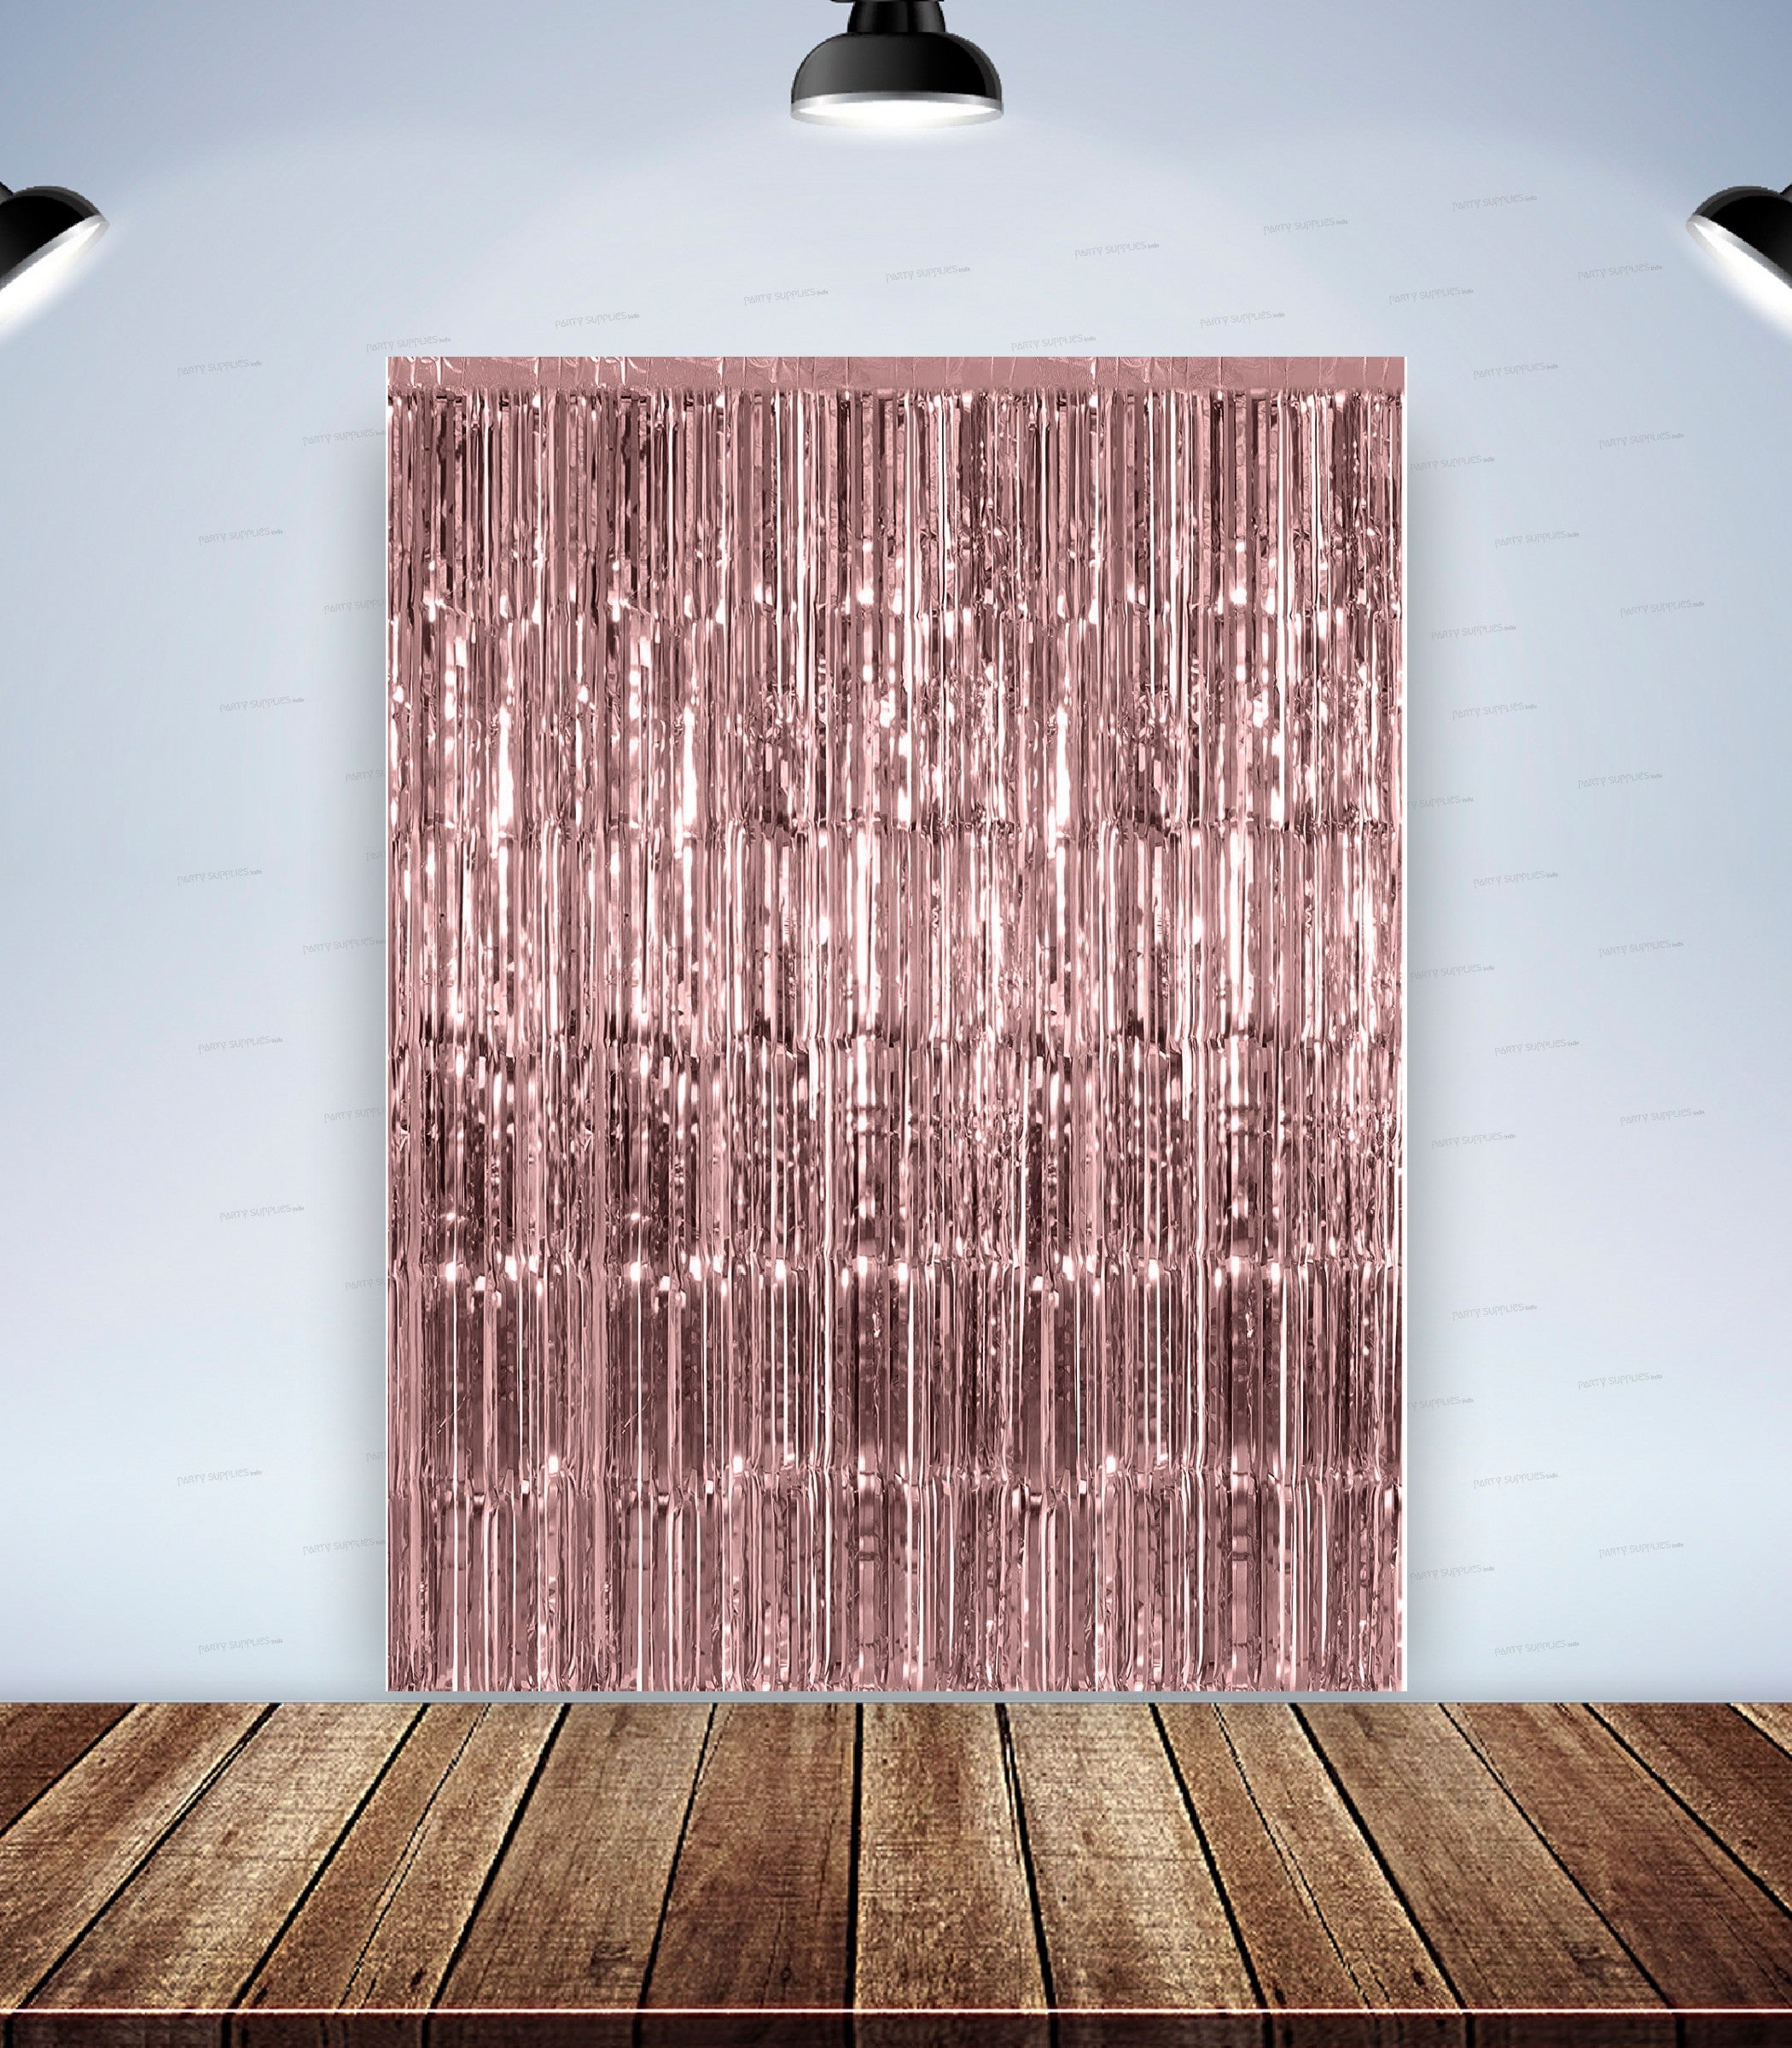 PSI Party Metallic Bronze Shimmer Curtain